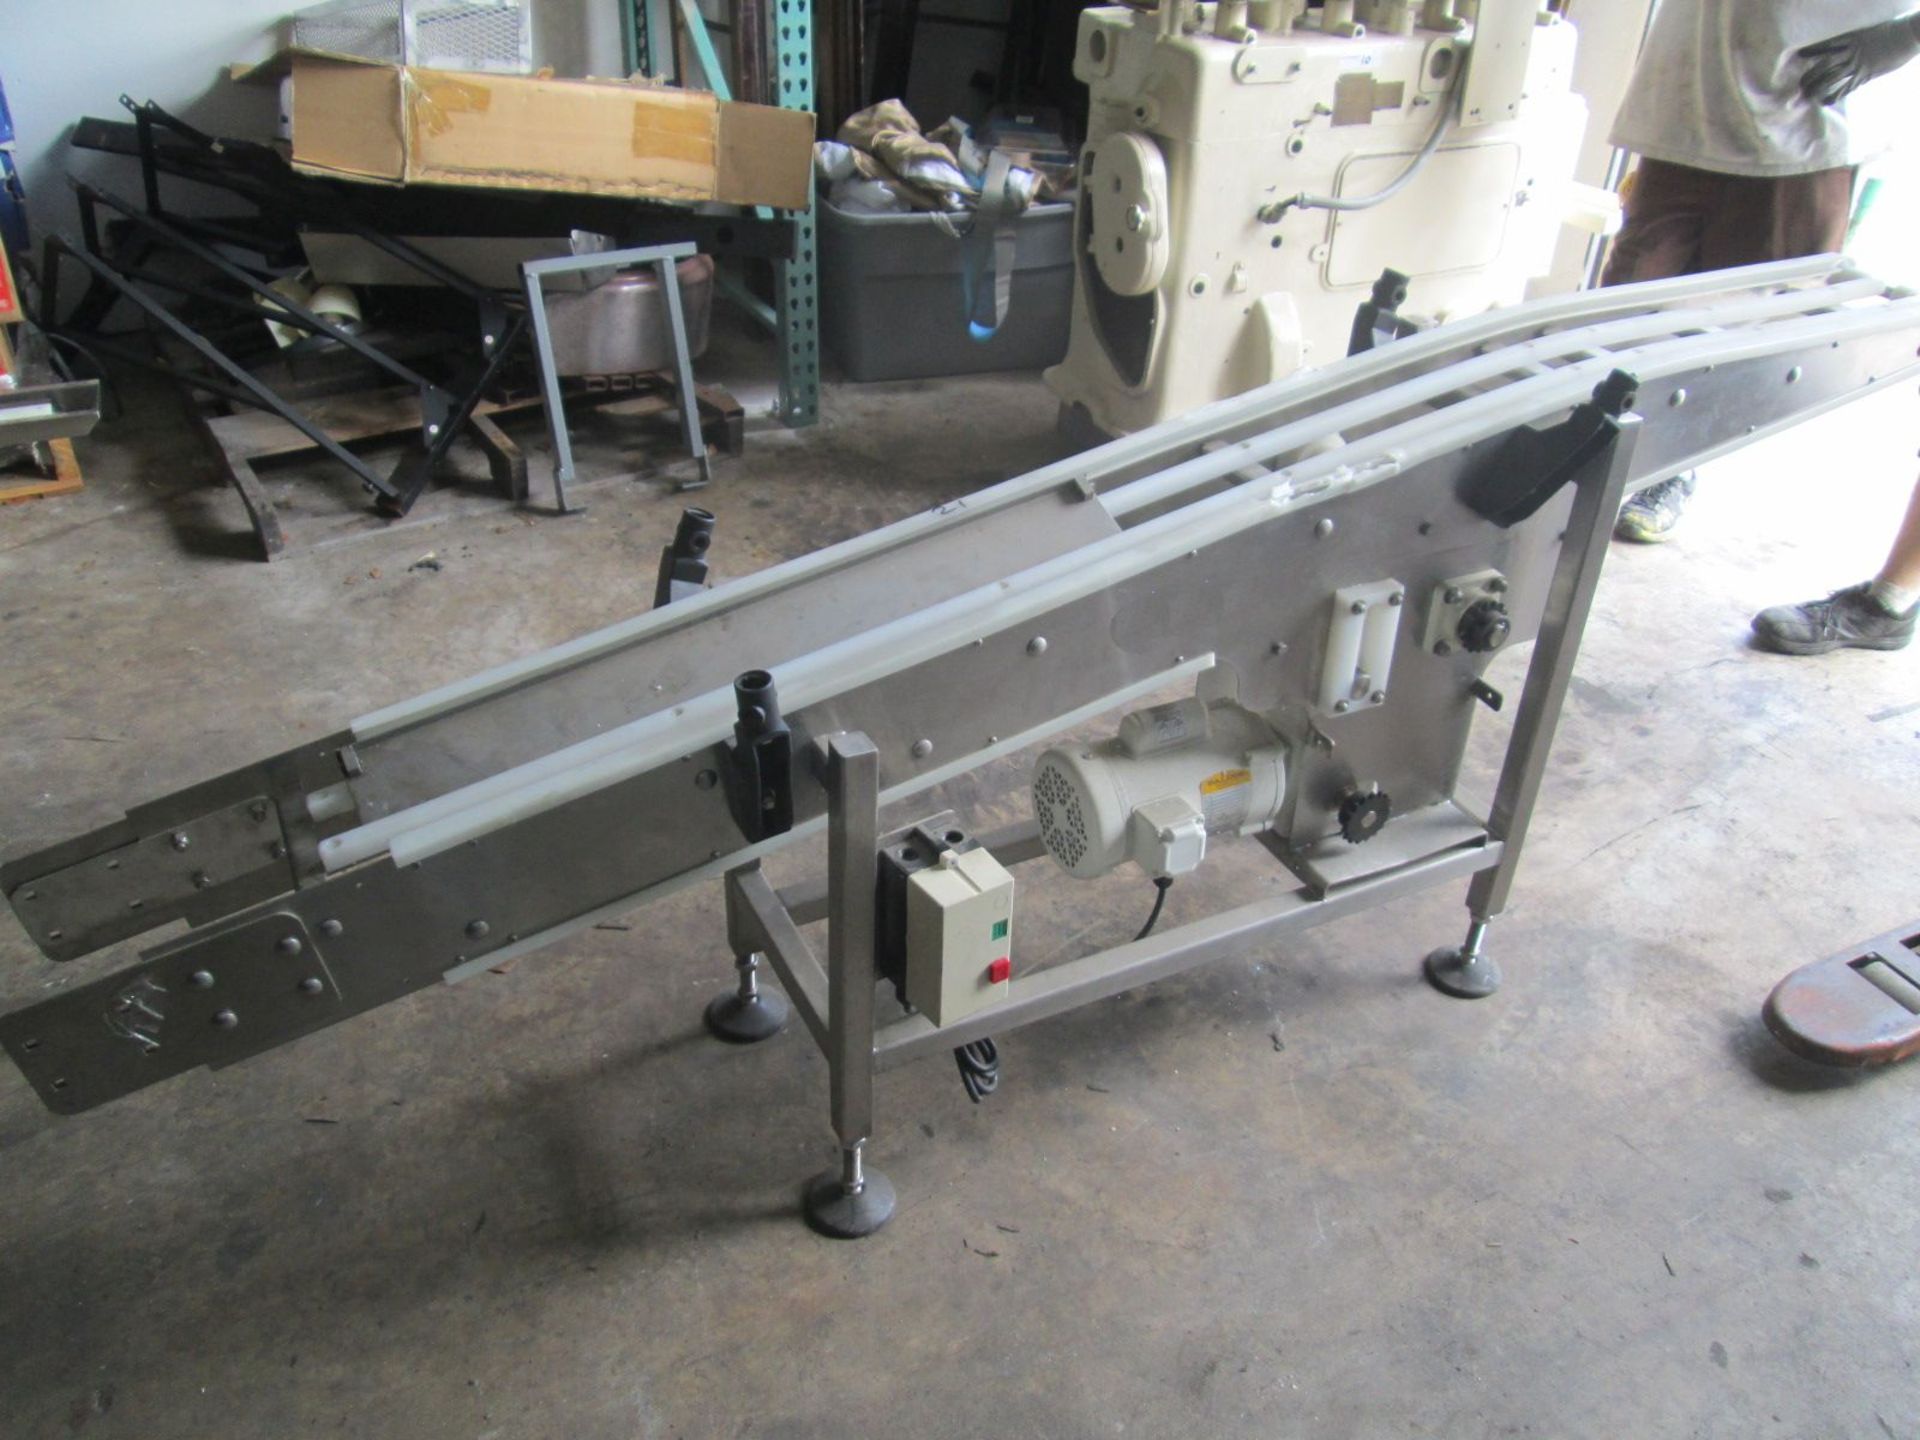 Motorized Stainless Steel Conveyor Section, (less belt) 1/2HP Gear Reduced Drive, on 110v,